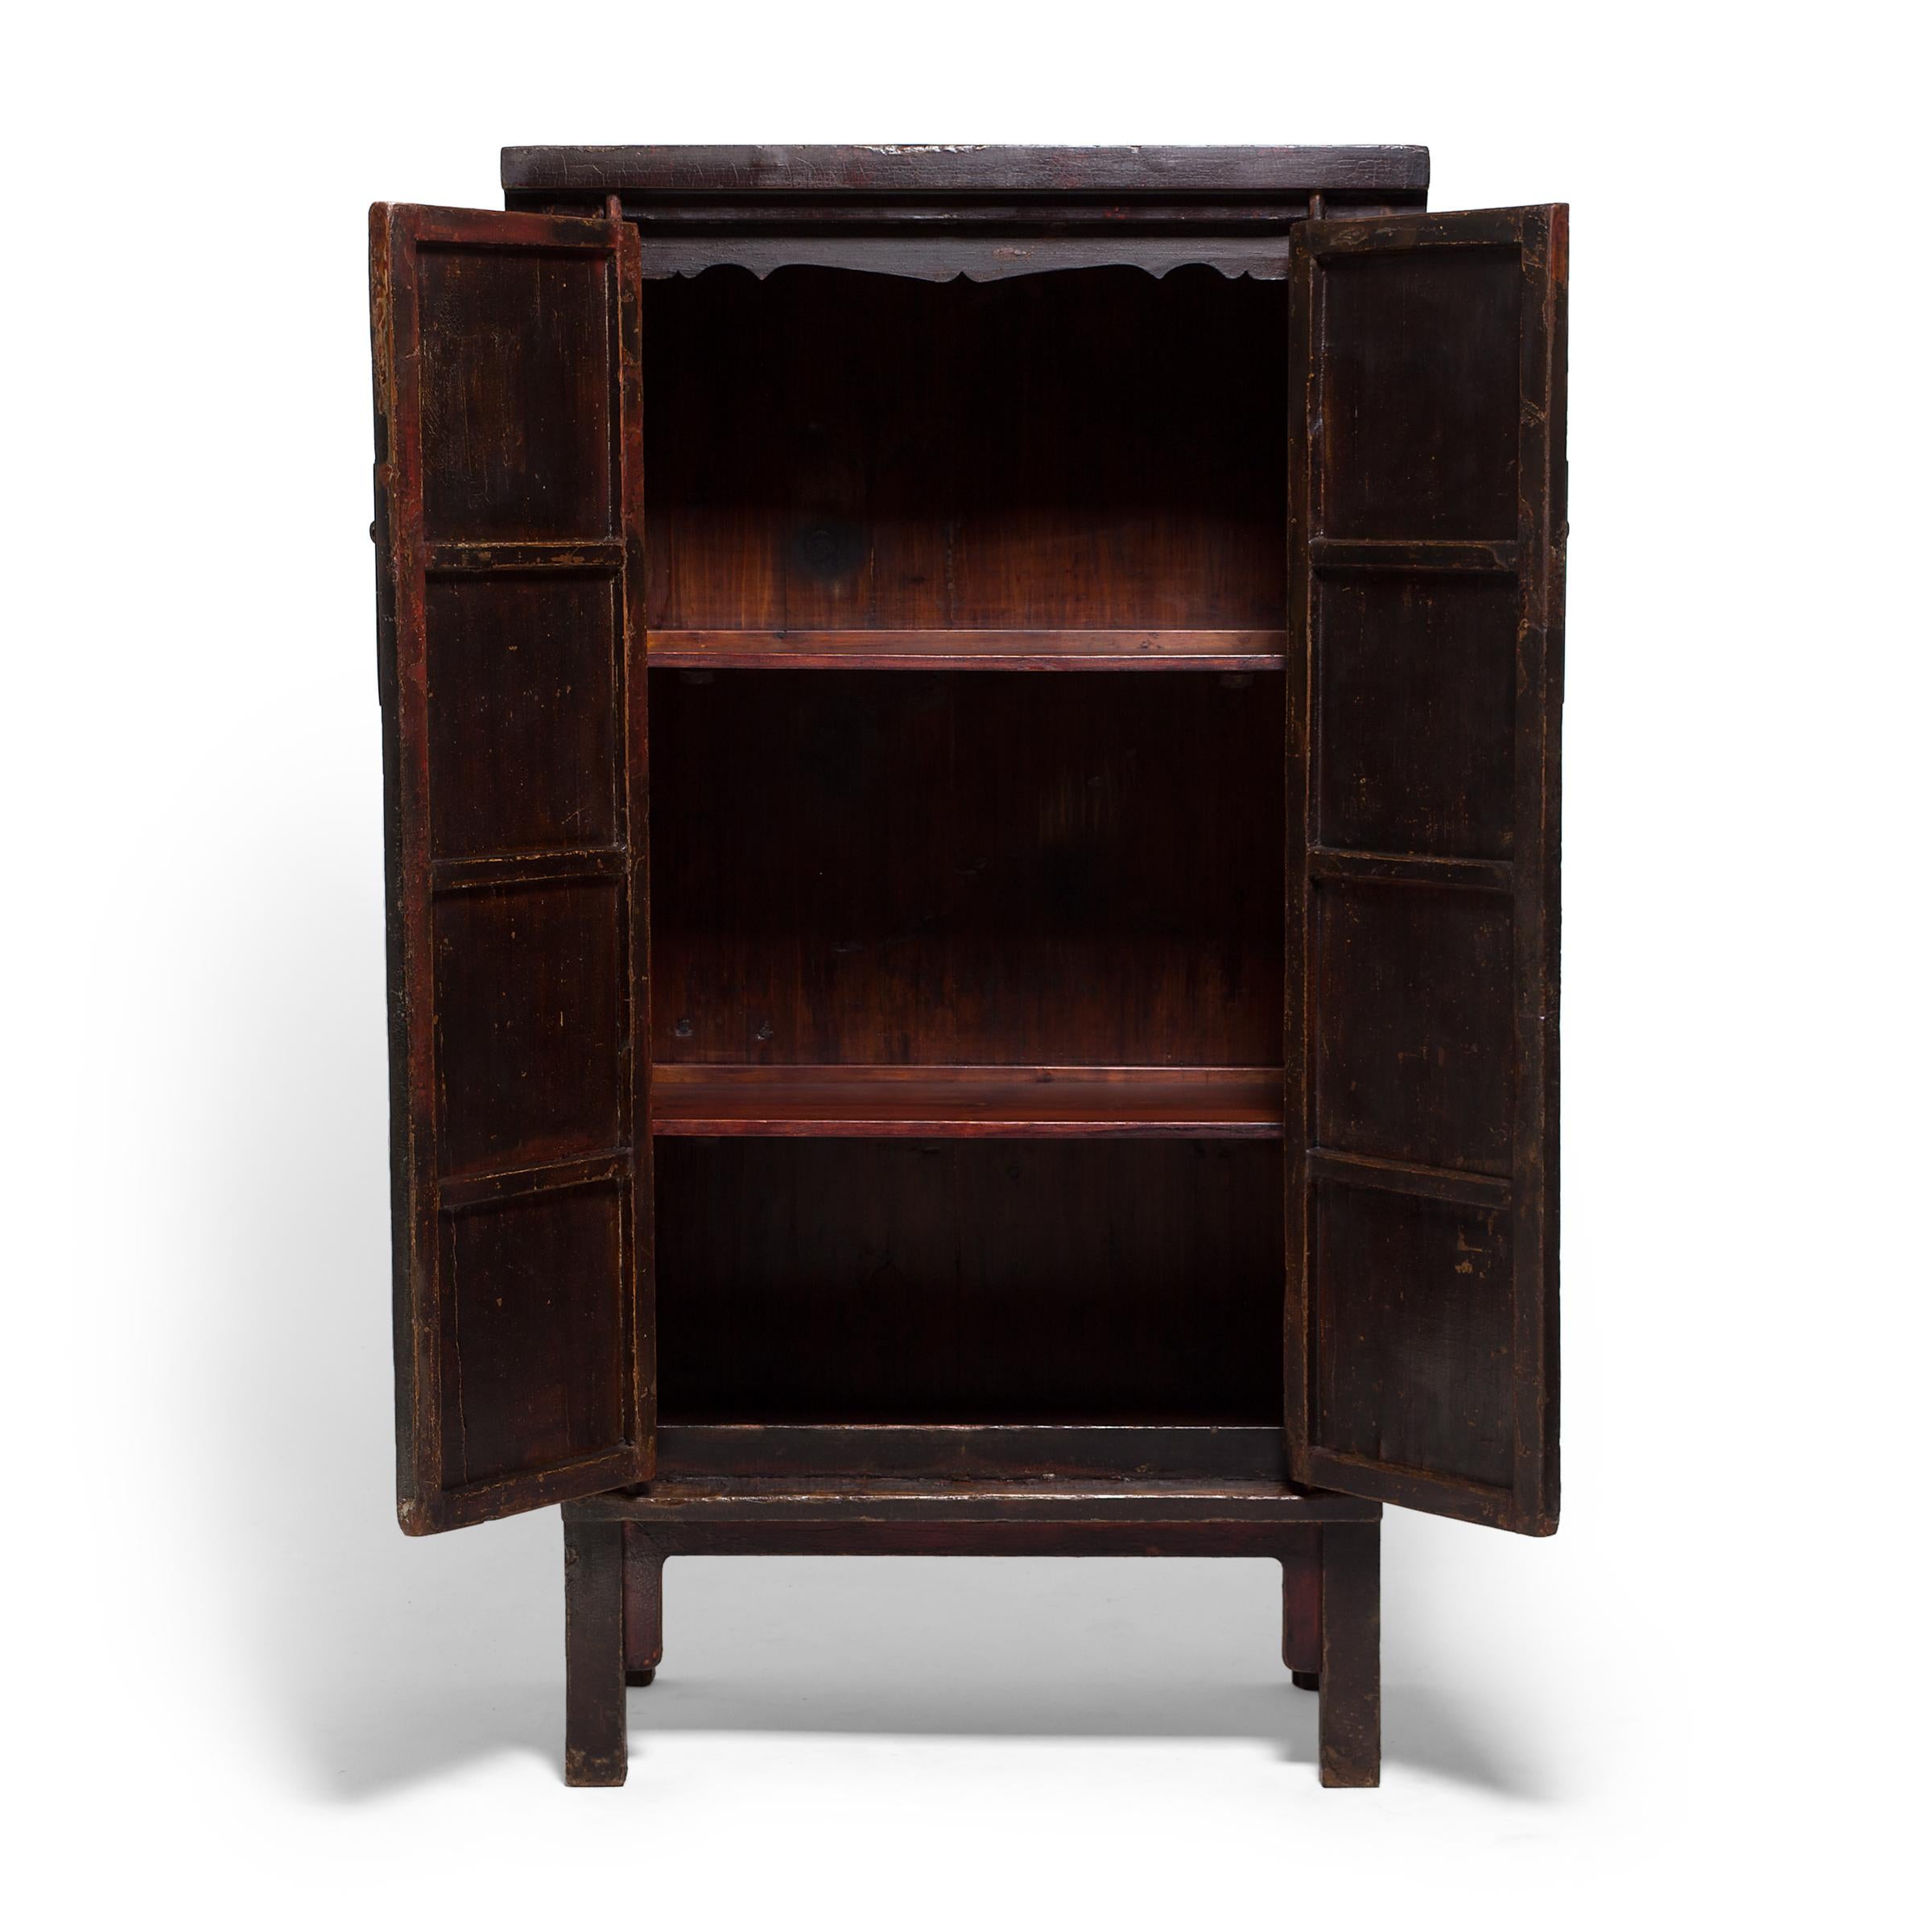 Evincing the austere attitude of Ming-dynasty aesthetics, this 19th century cabinet is minimally accented with clean lines, rounded spandrels, and discrete brass hardware. Traces of the original painted decoration adorn the tall doors, depicting a